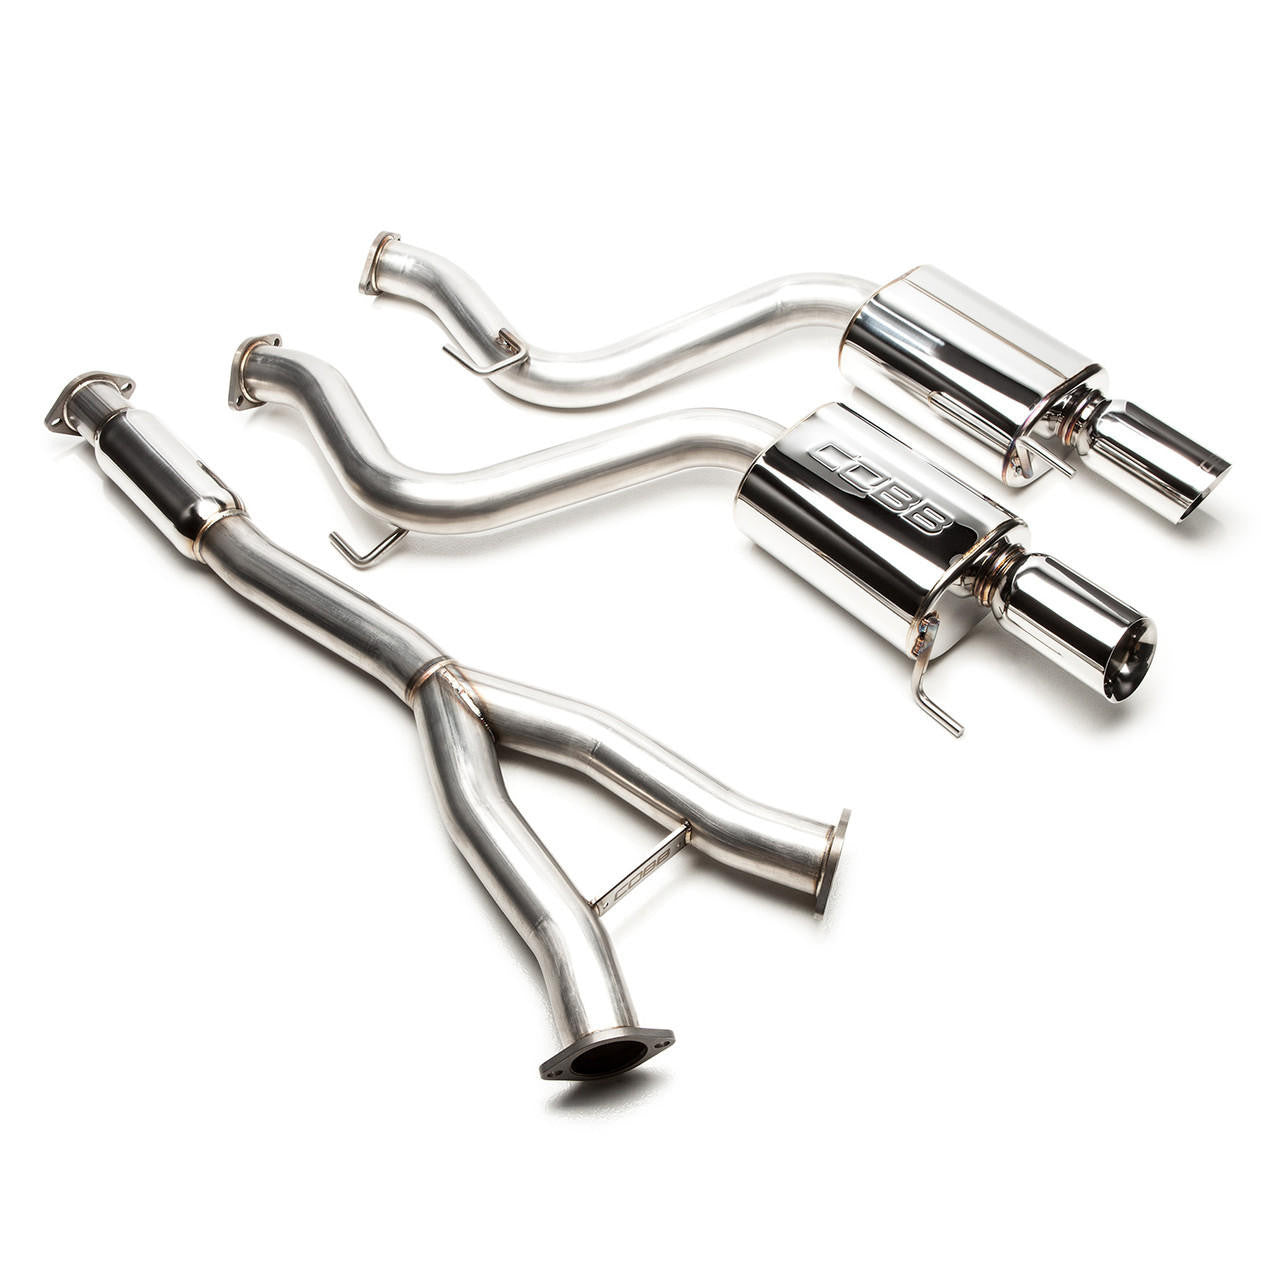  COBB Tuning Cat-Back Exhaust for Ford Mustang Ecoboost 15-23 5M2150 